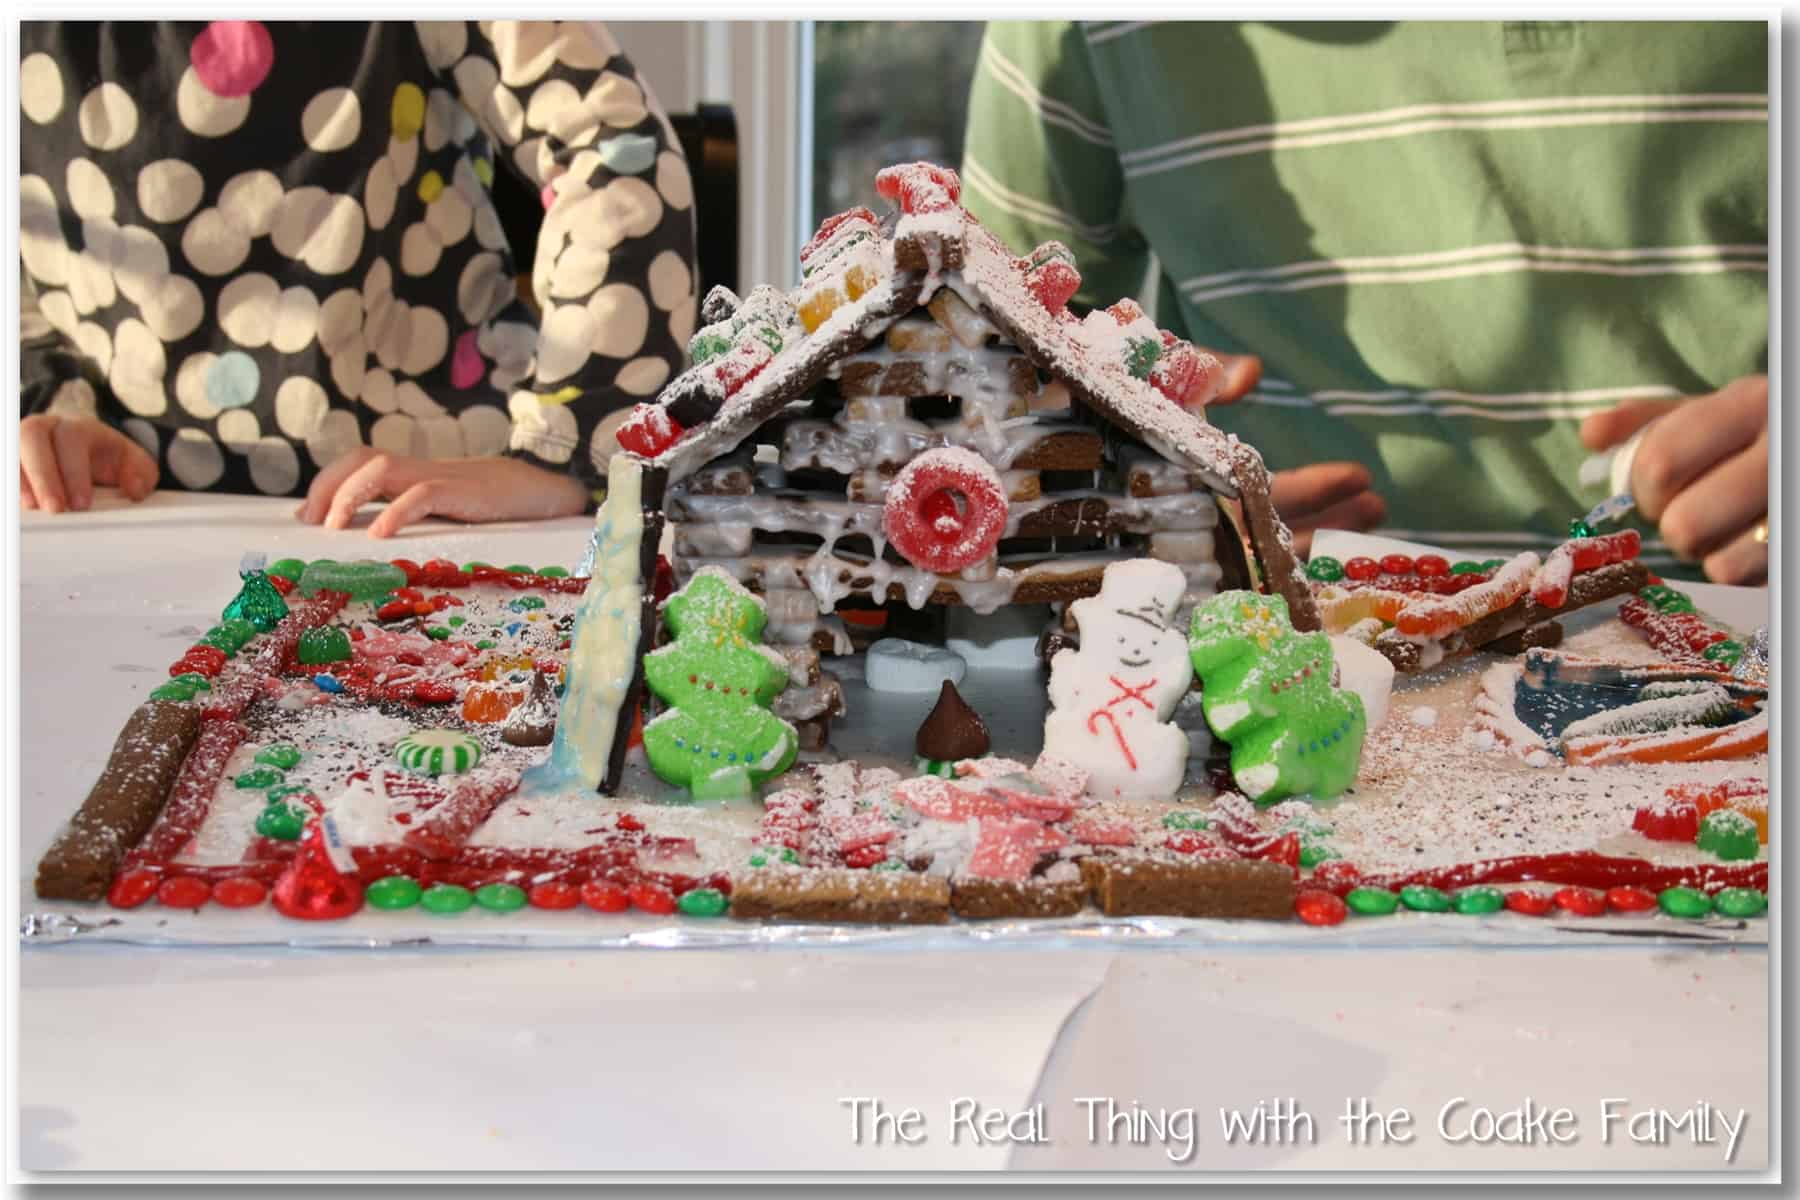 log cabin style gingerbread house decorated with candy